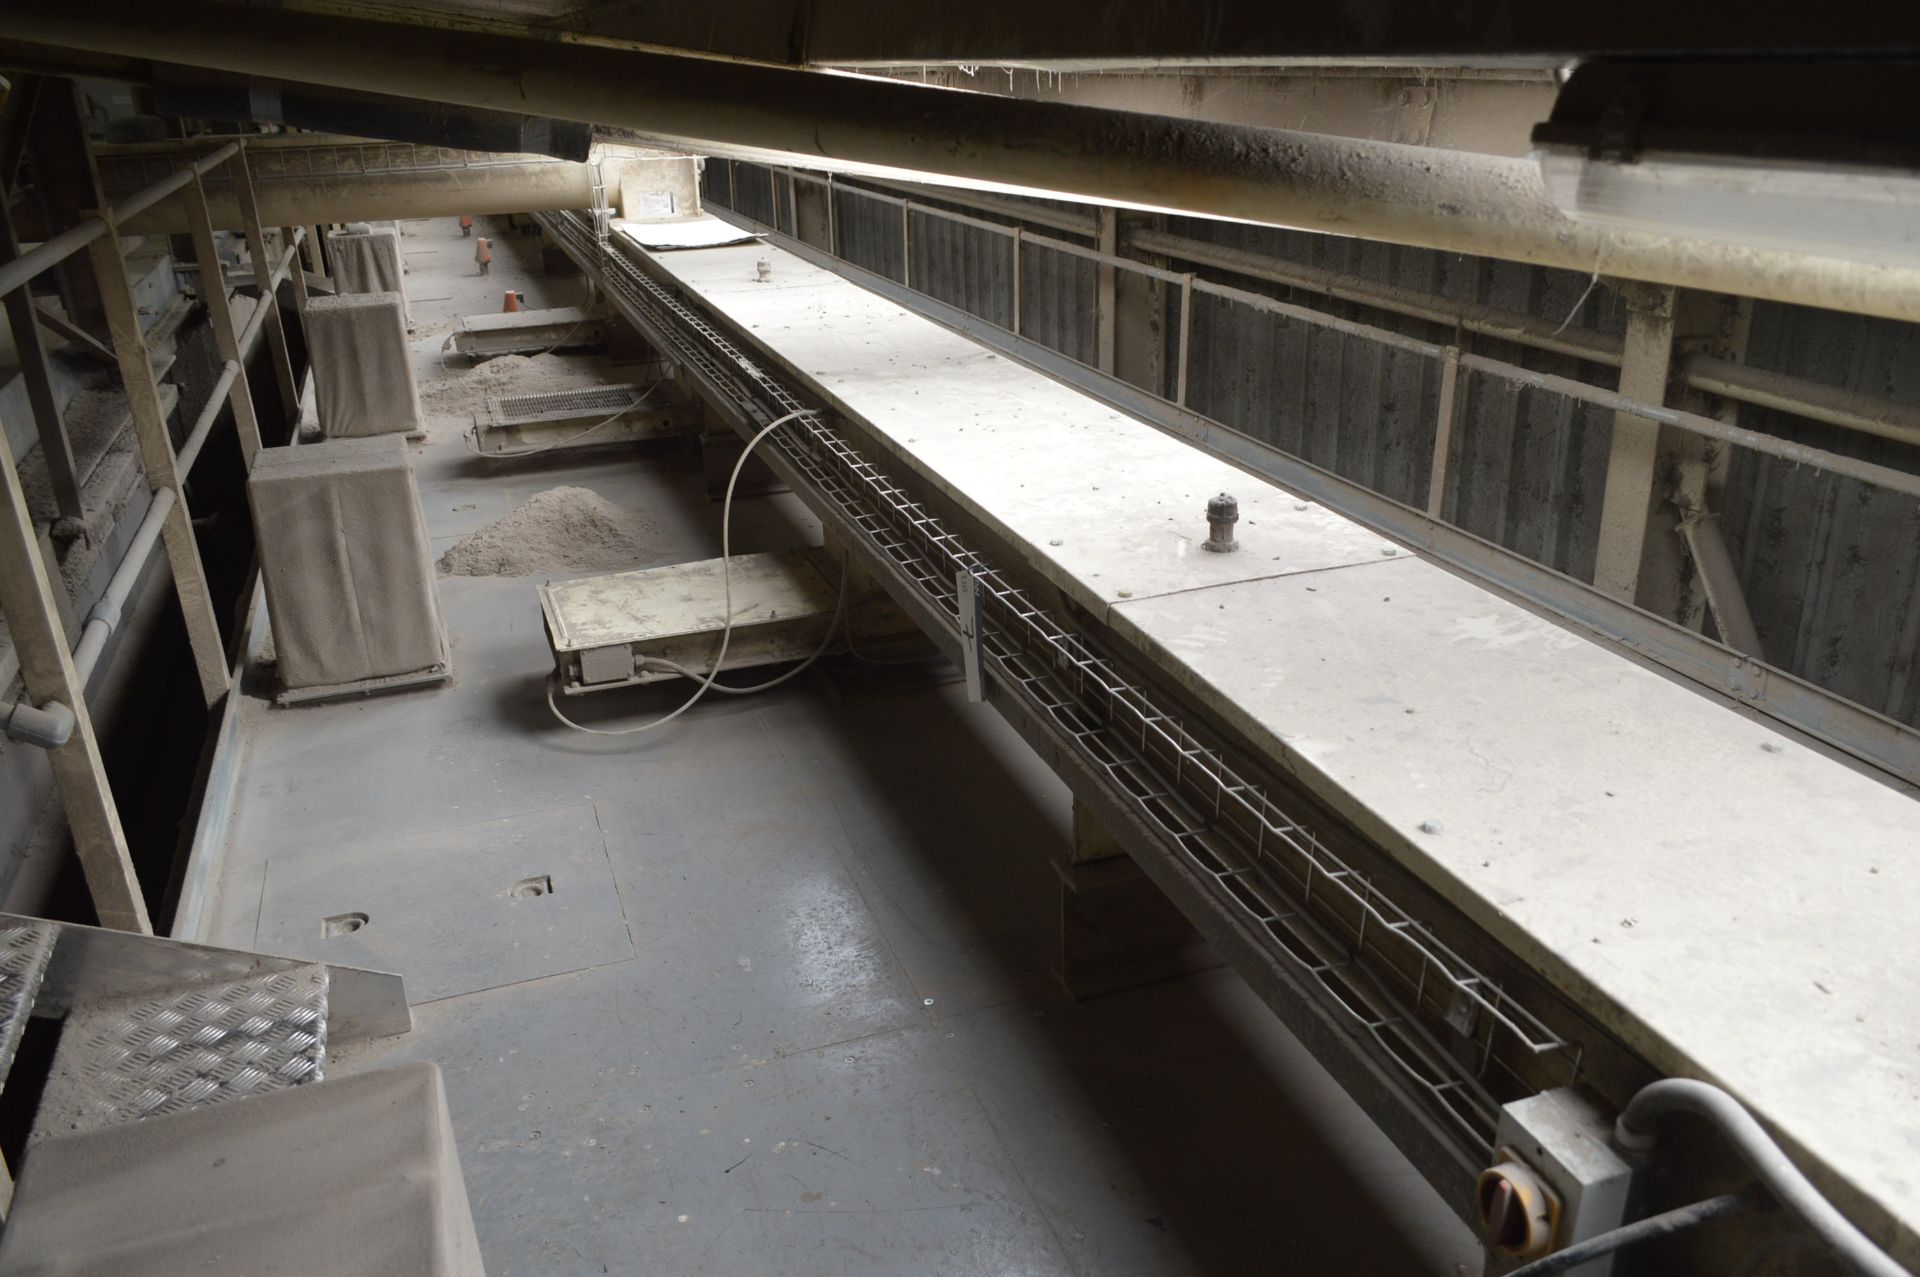 350mm dia. SCREW CONVEYOR, approx. 16.75m long, with Brook CP 5.5kW geared electric motor, seven - Bild 4 aus 4